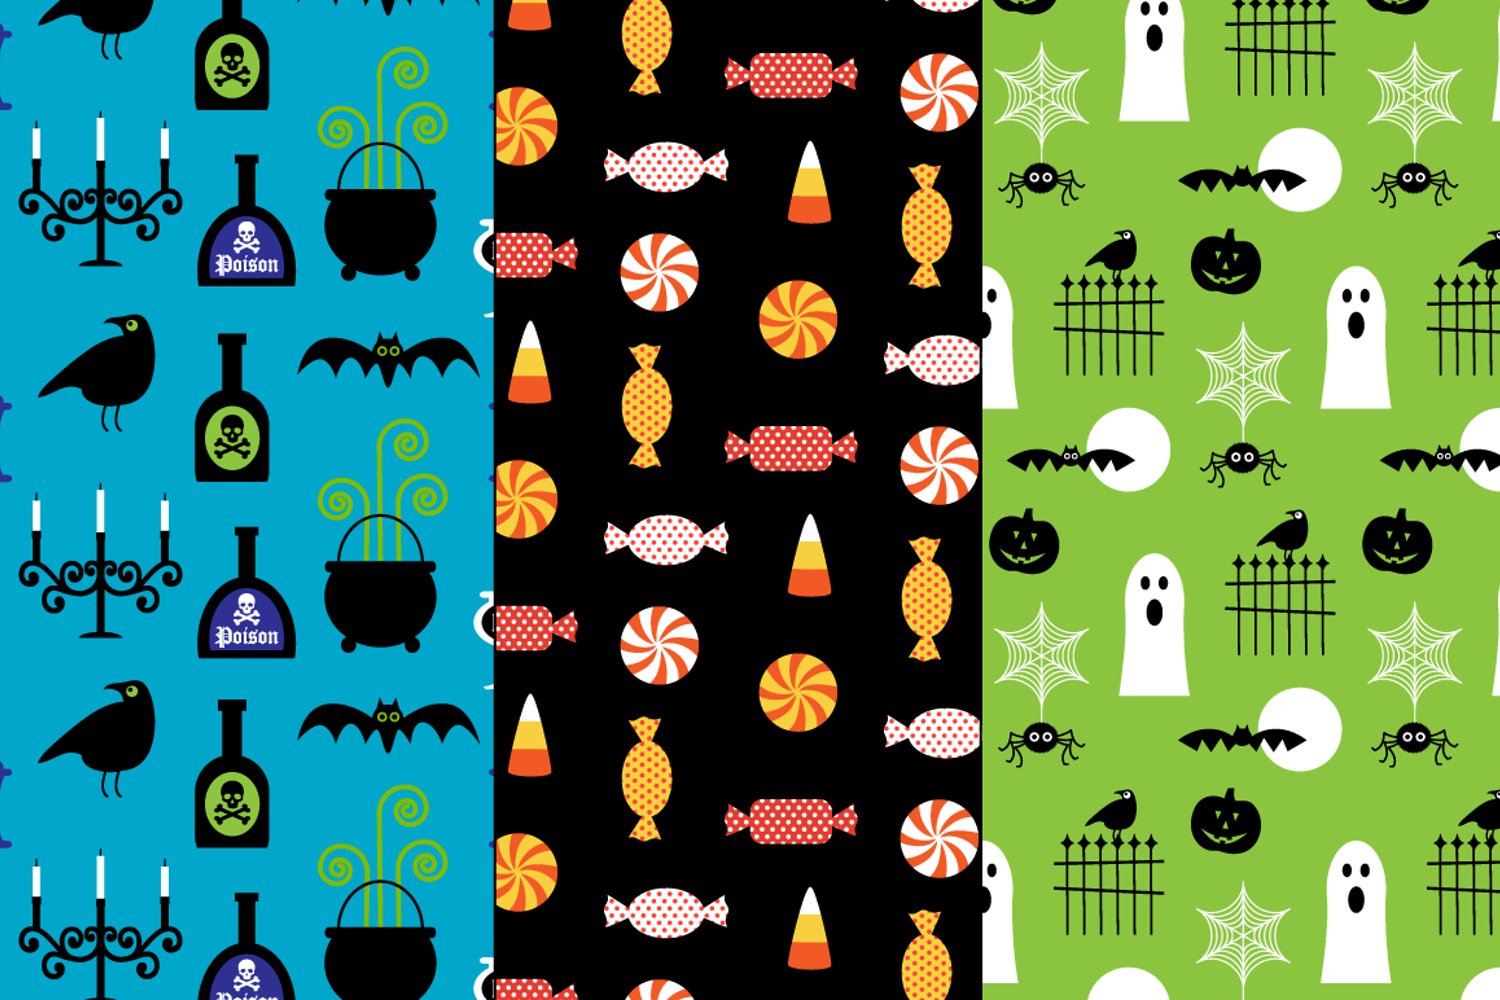 Halloween patterns in blue, black and green color variations.